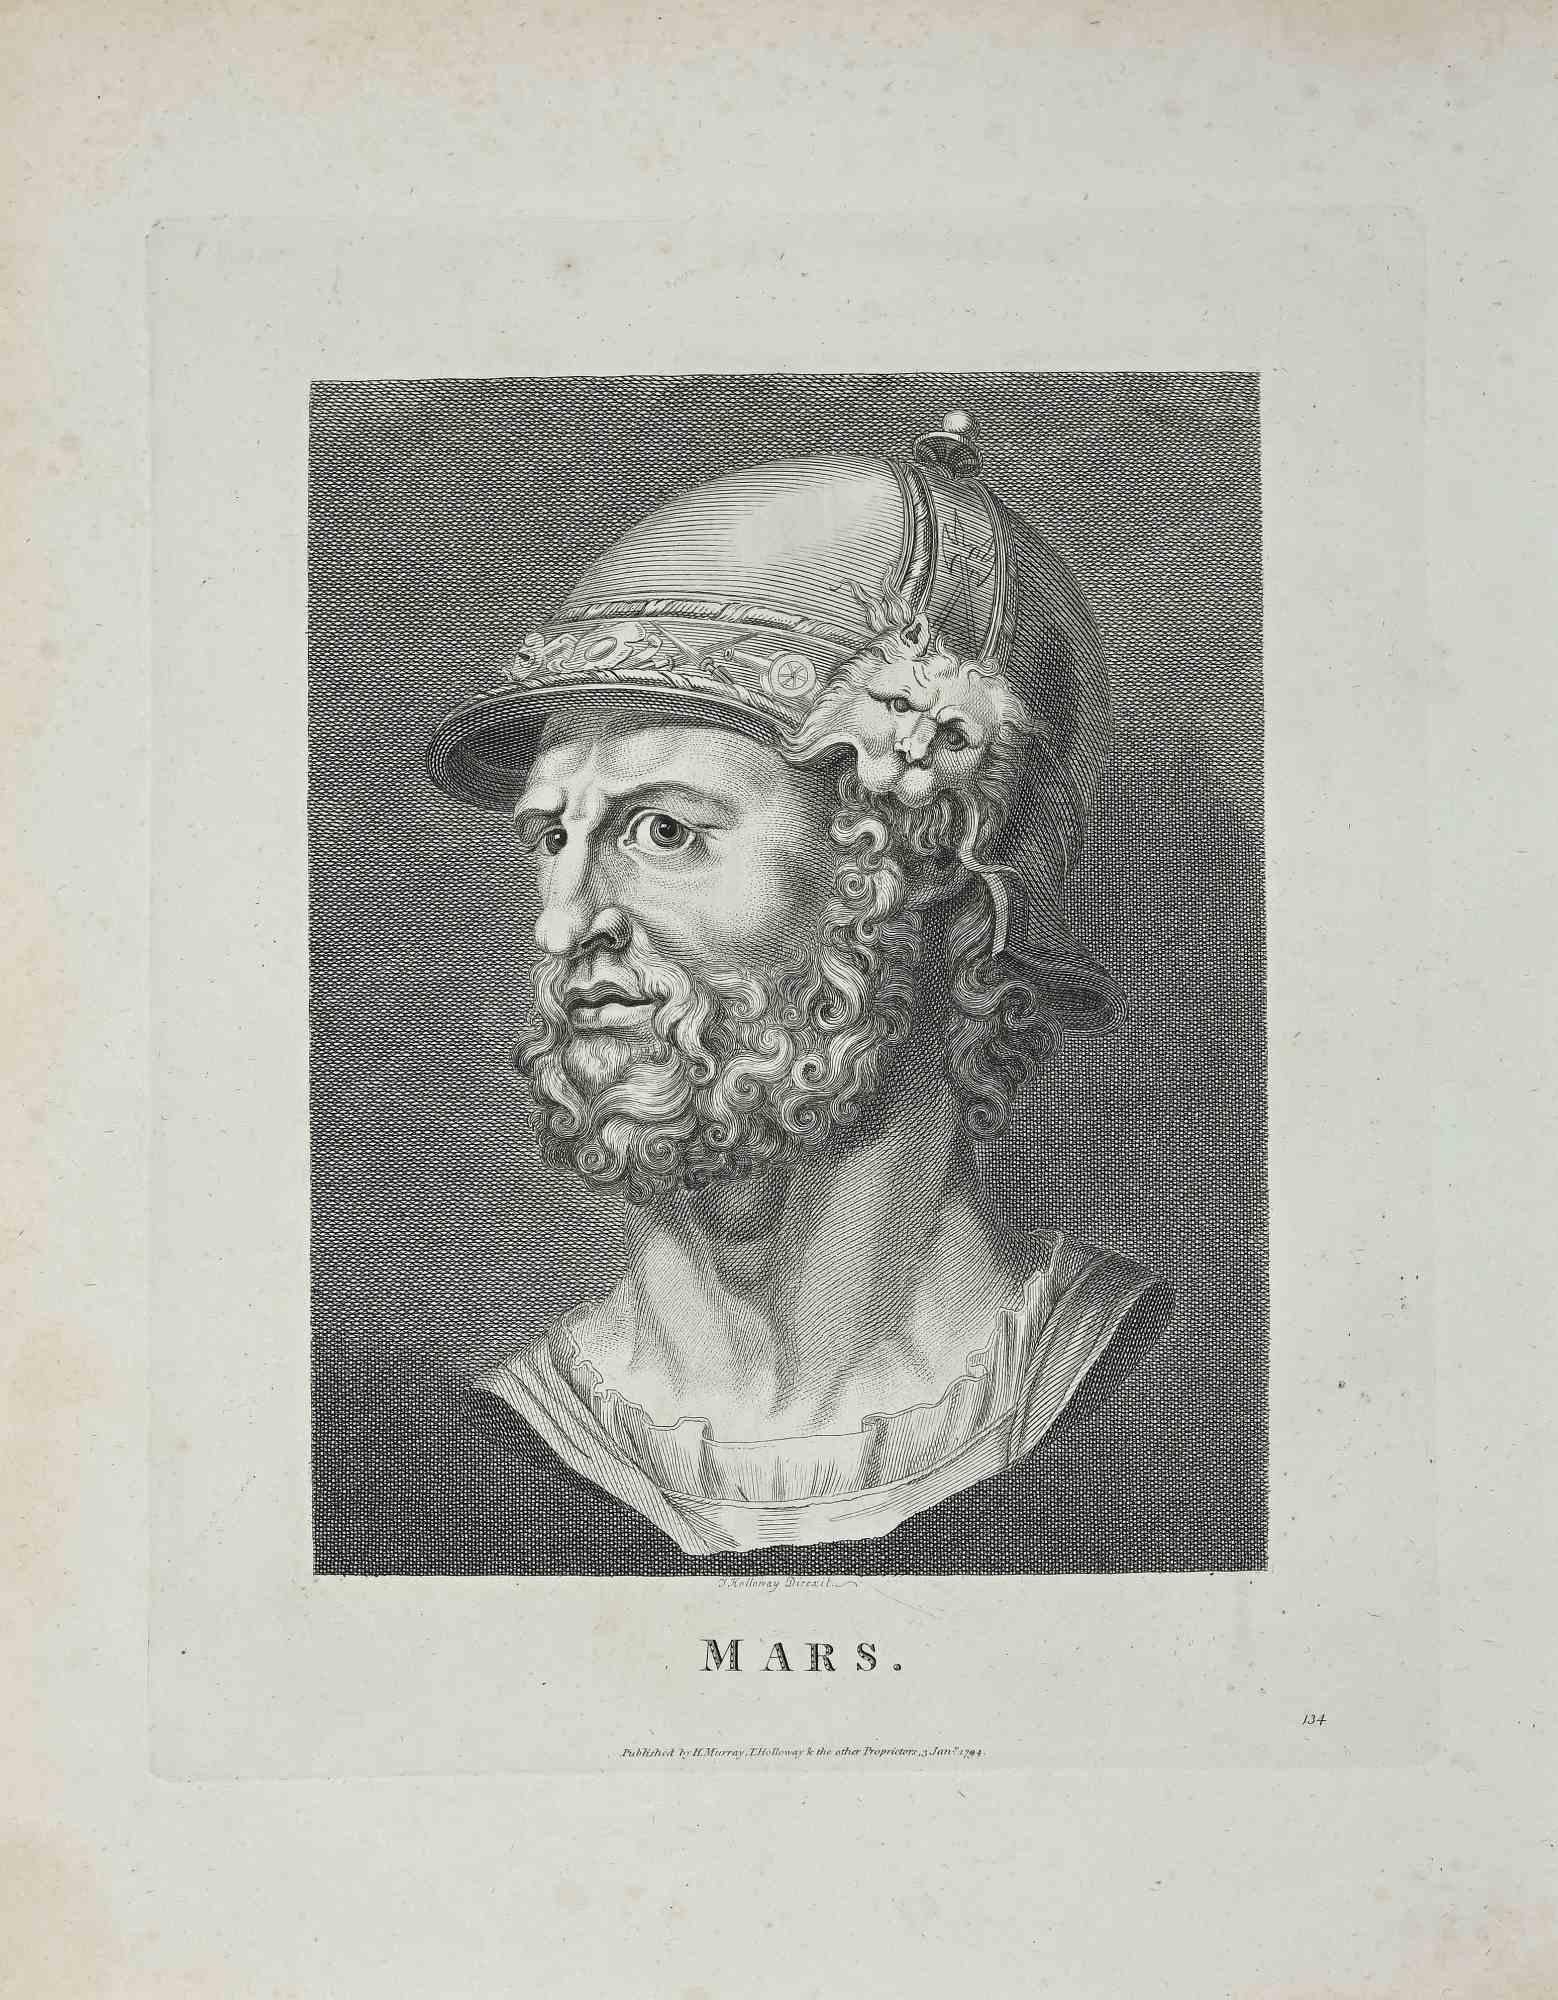 Portrait of Mars is an original artwork realized by Thomas Holloway (1748 - 1827).

Original Etching from J.C. Lavater's "Essays on Physiognomy, Designed to promote the Knowledge and the Love of Mankind", London, Bensley, 1810. 

A the bottom center